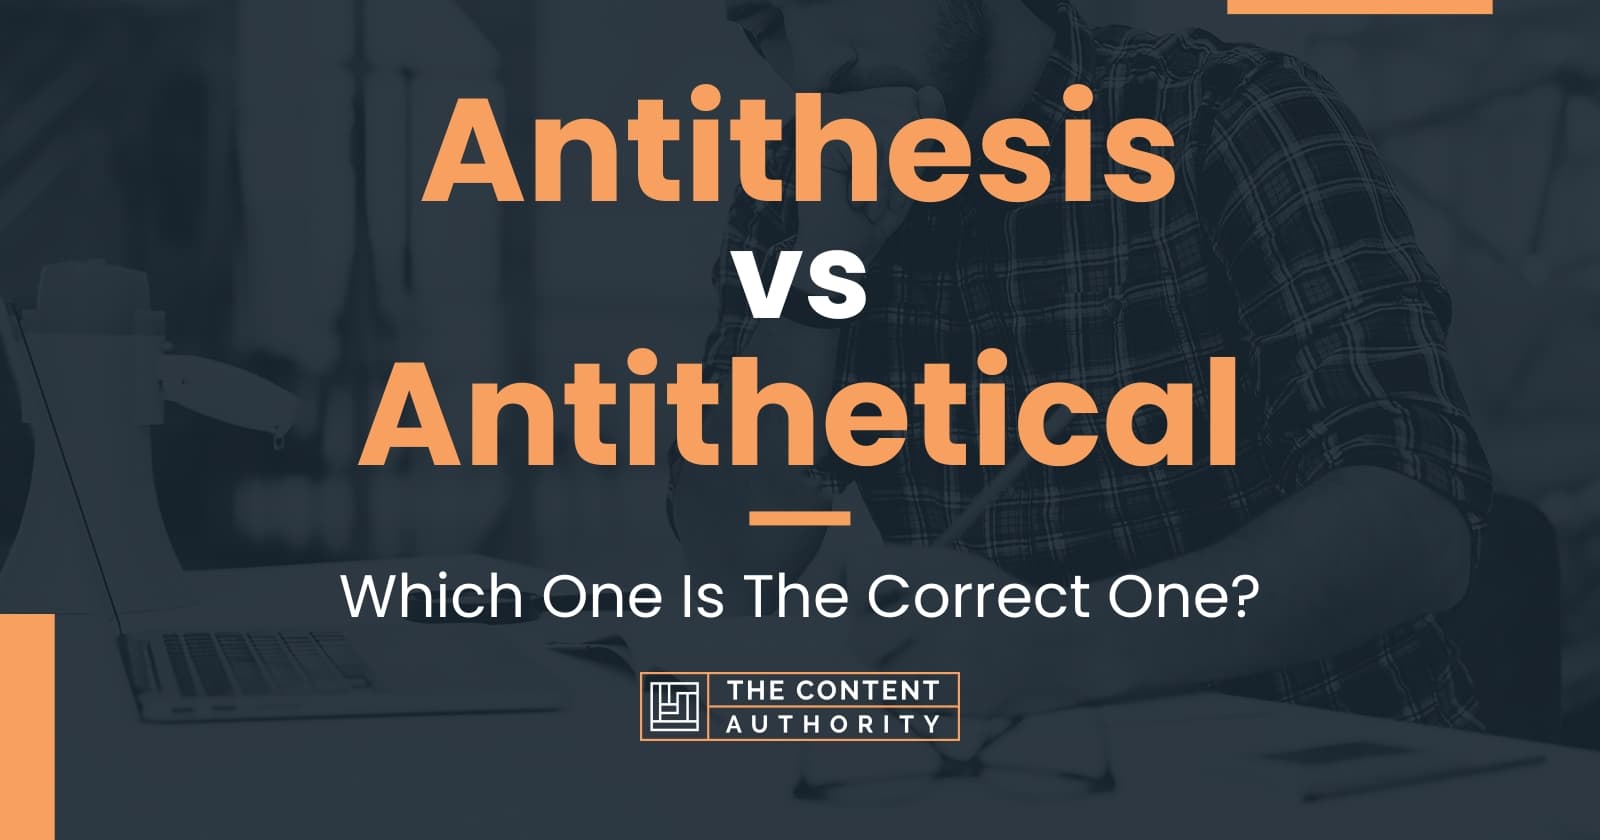 Antithesis vs Antithetical: Which One Is The Correct One?